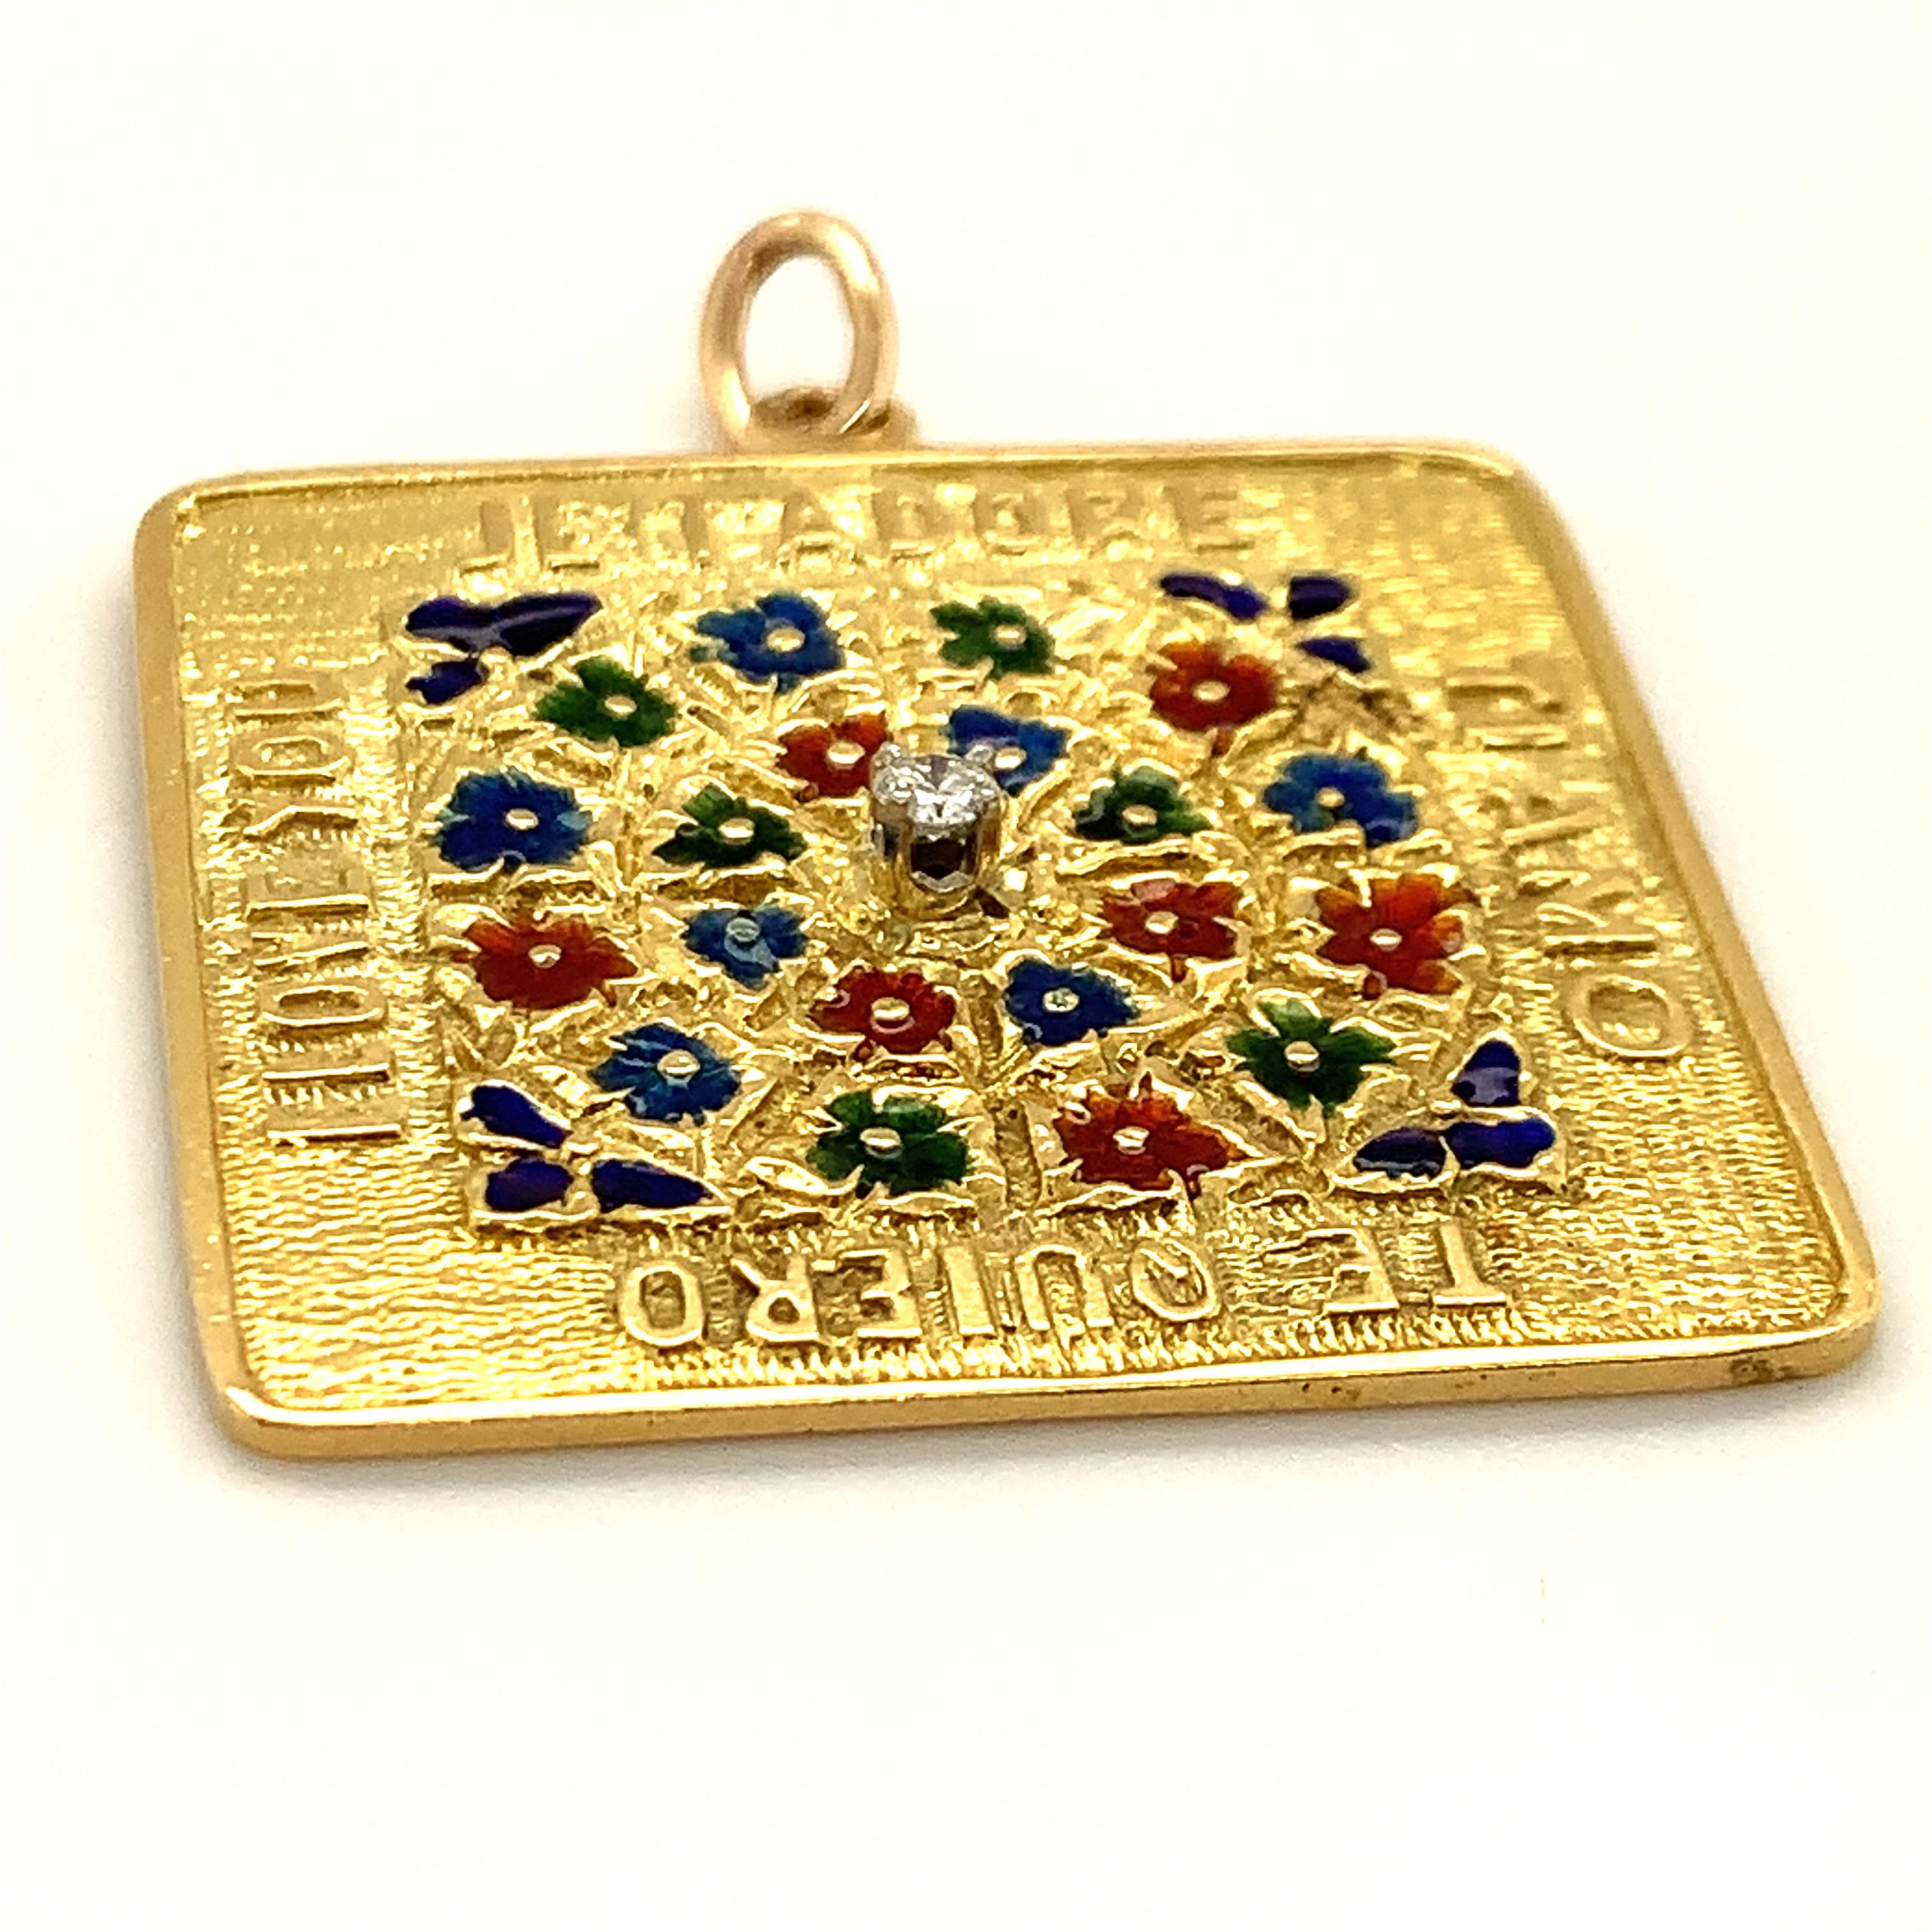 The ultimate love amulet.  A large square charm.  Made and signed by Merrin.  18K yellow gold. The center is comprised of brilliant enameled flowers in a circular pattern.  The colors are  vibrant and reflective; they almost have the effect of a